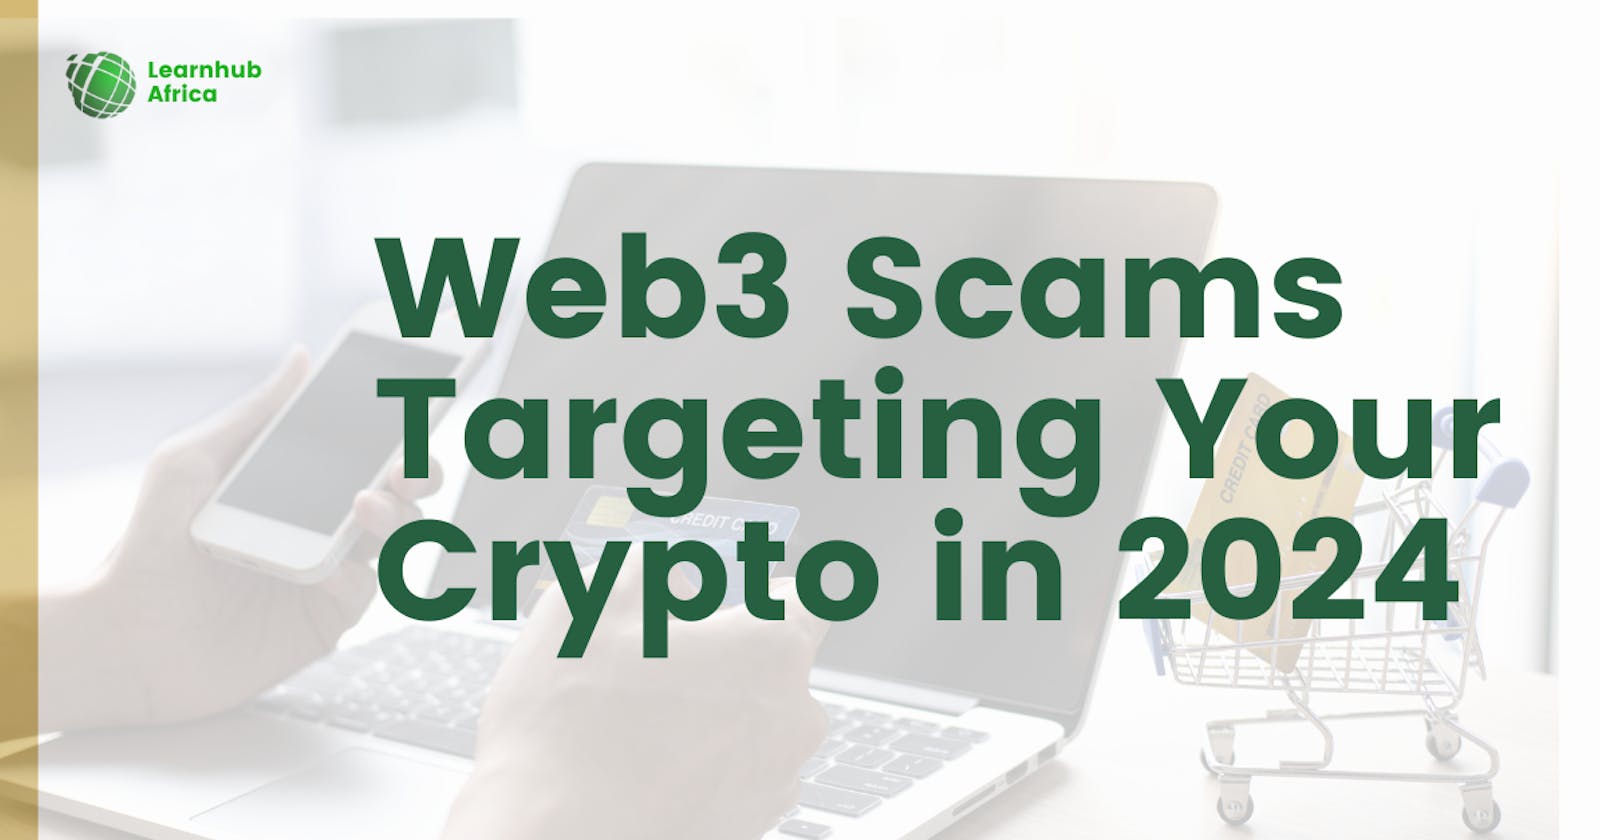 Web3 Scams Targeting Your Crypto in 2024